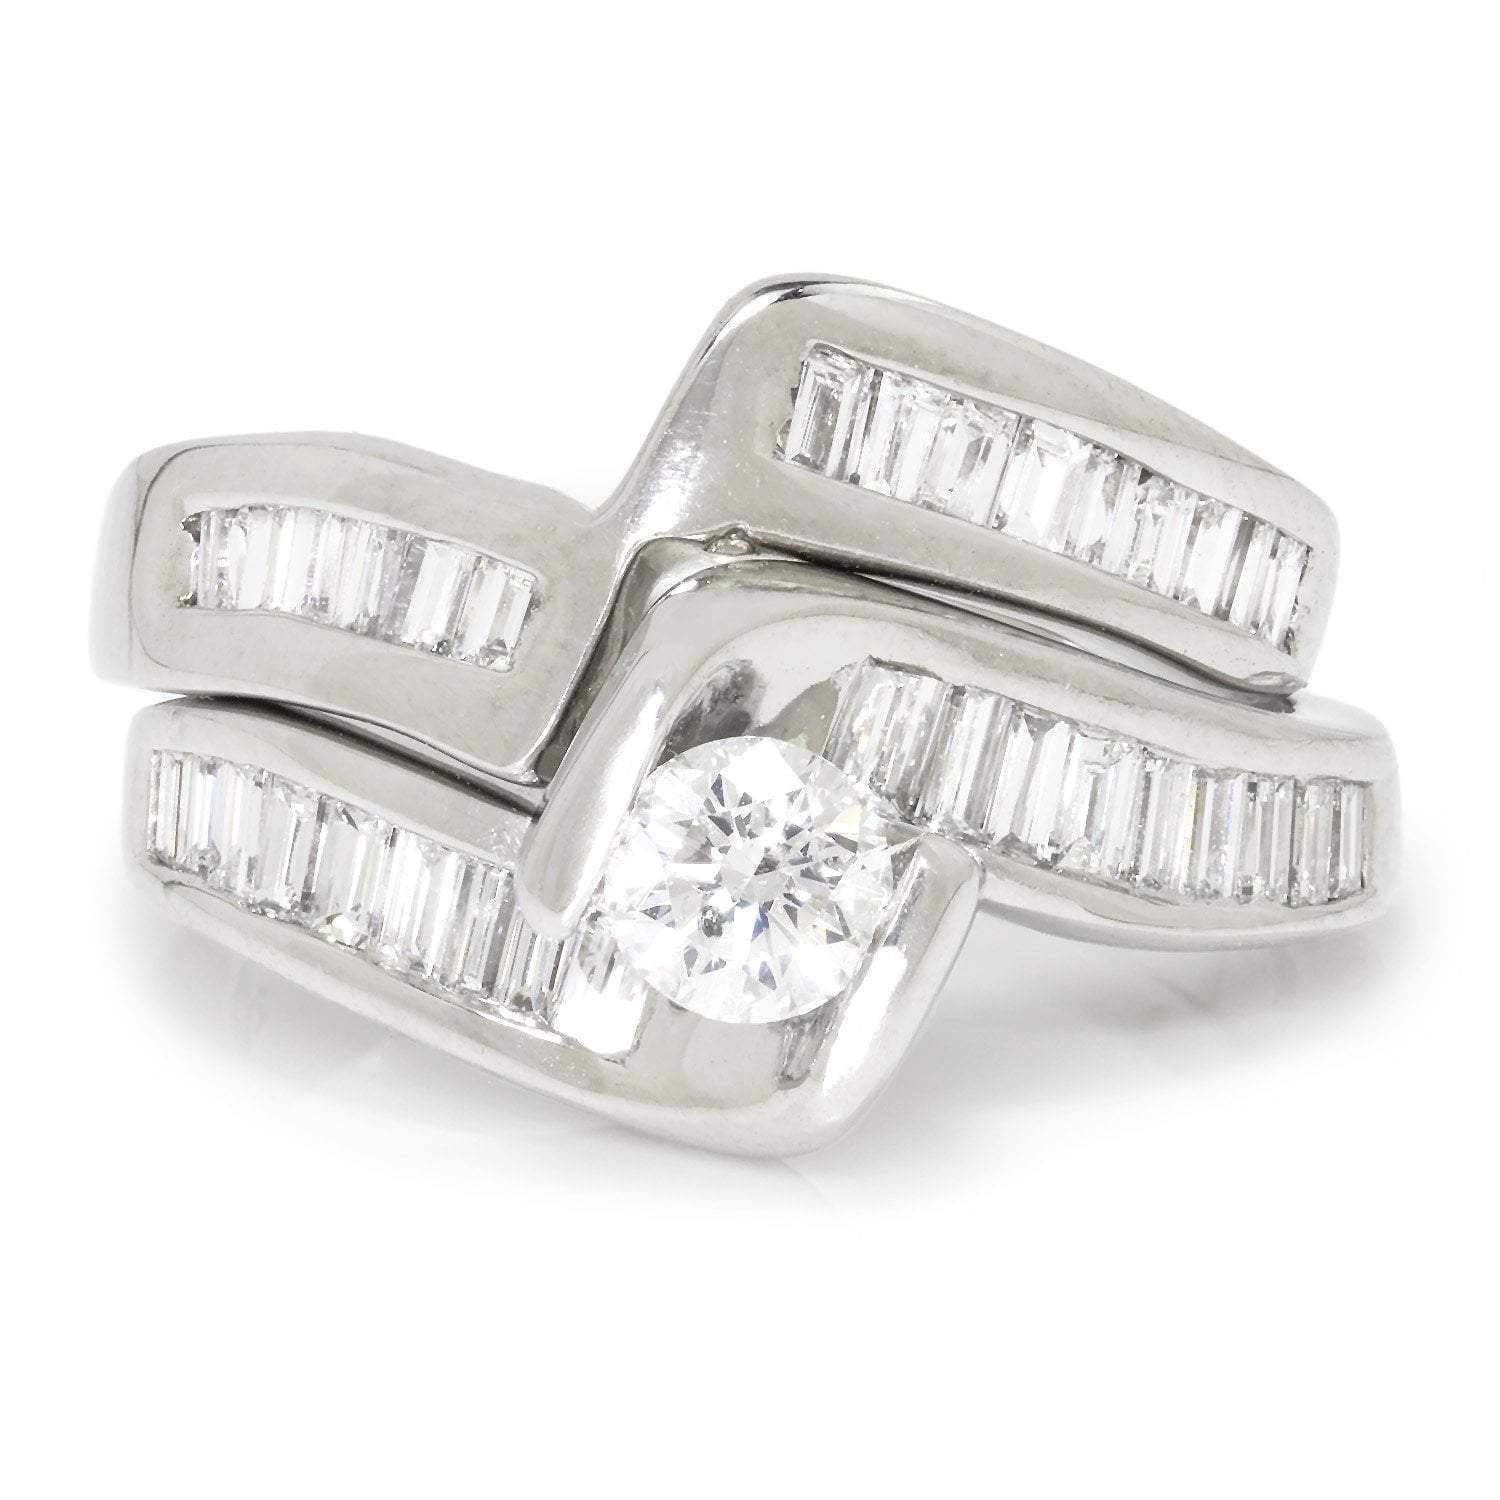 Sample Sale Ready to ship-White Sapphire Channel Tension set Engagement Ring,  Solitaire, Thick band, 1ct, 6mm, Silver Rhodium